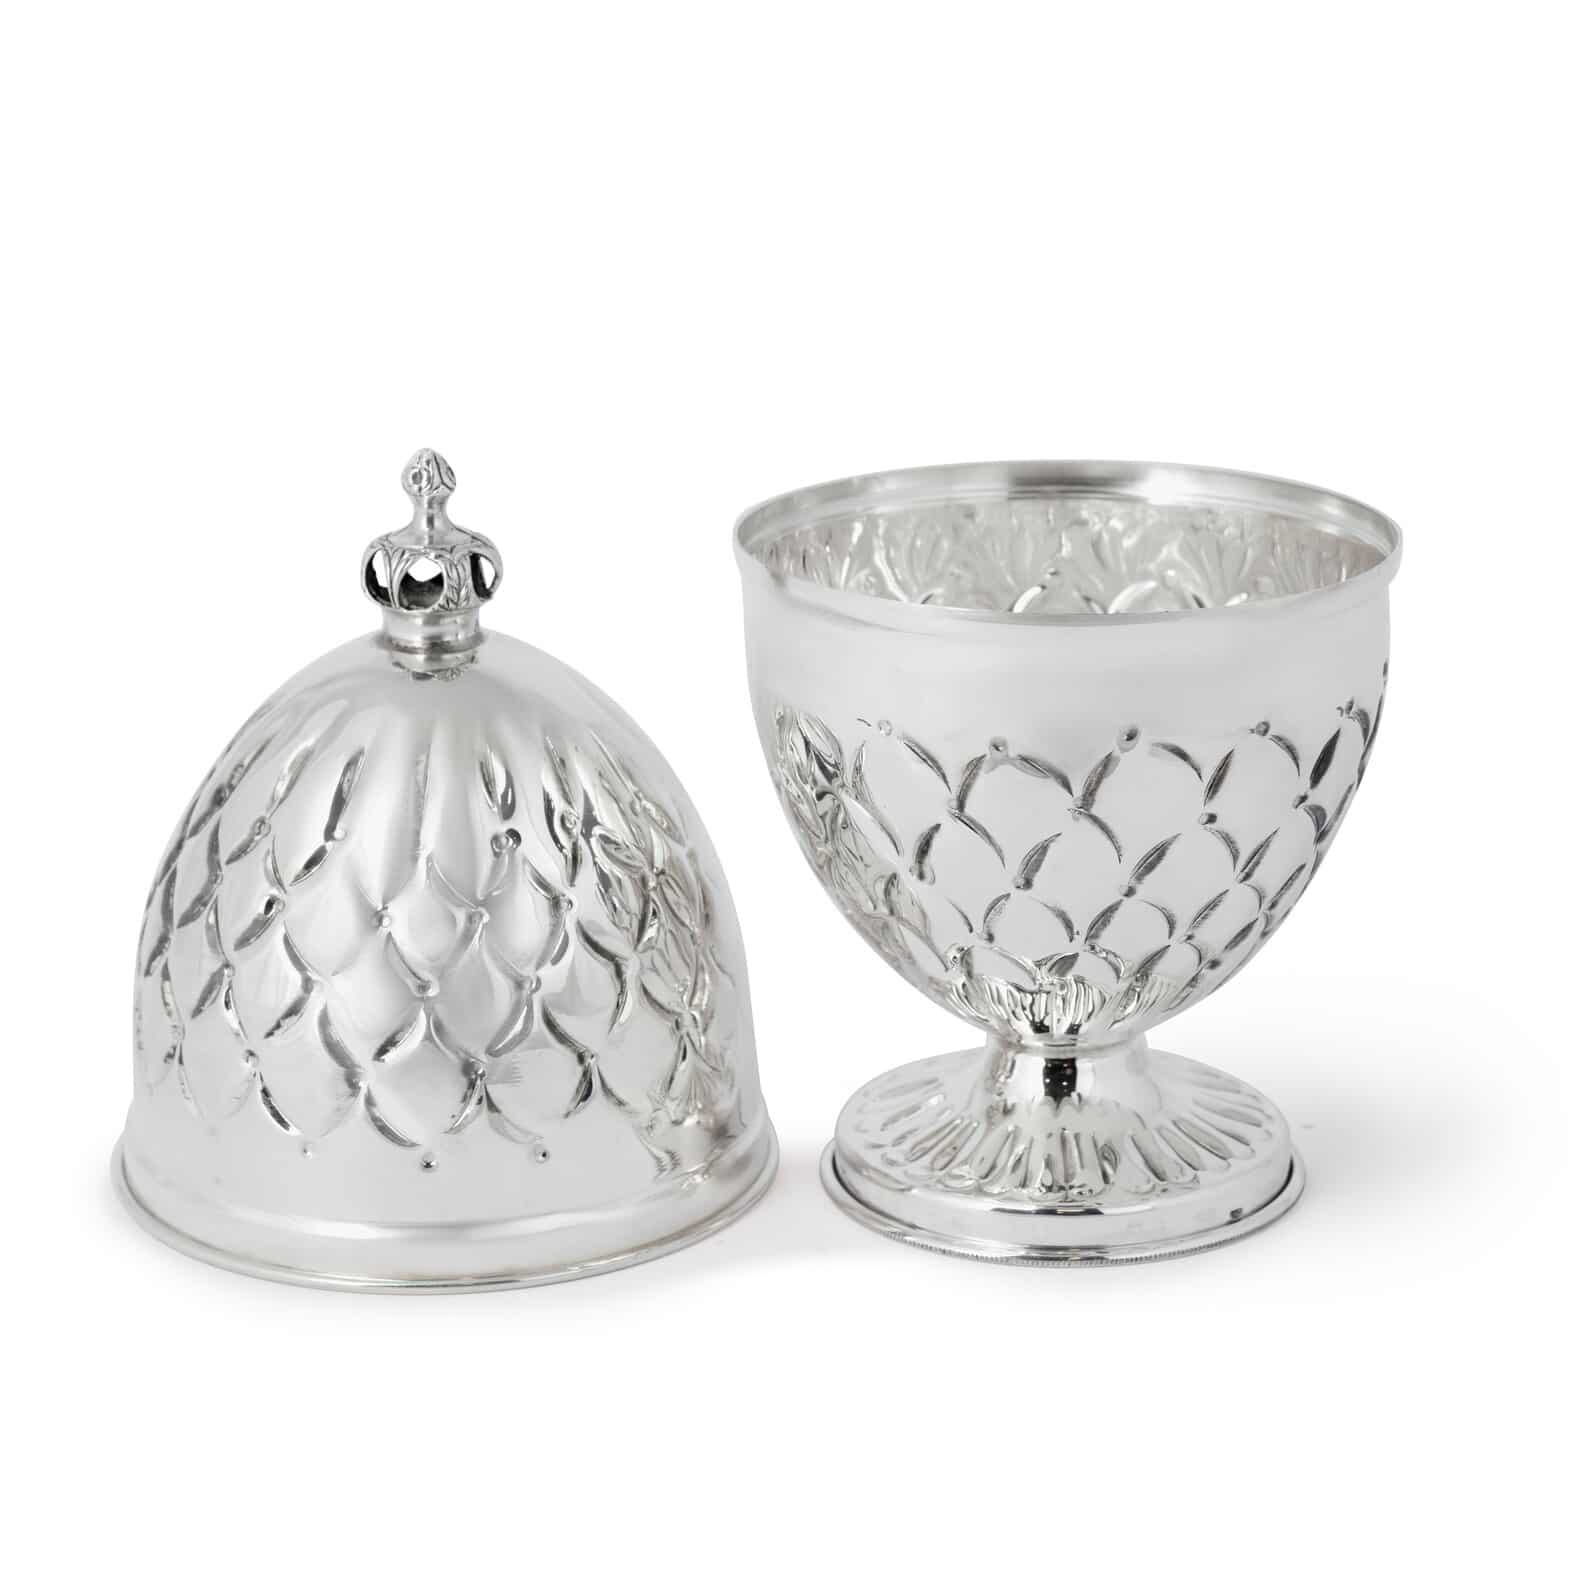 Traditional Small Standing Sterling Silver Etrog box